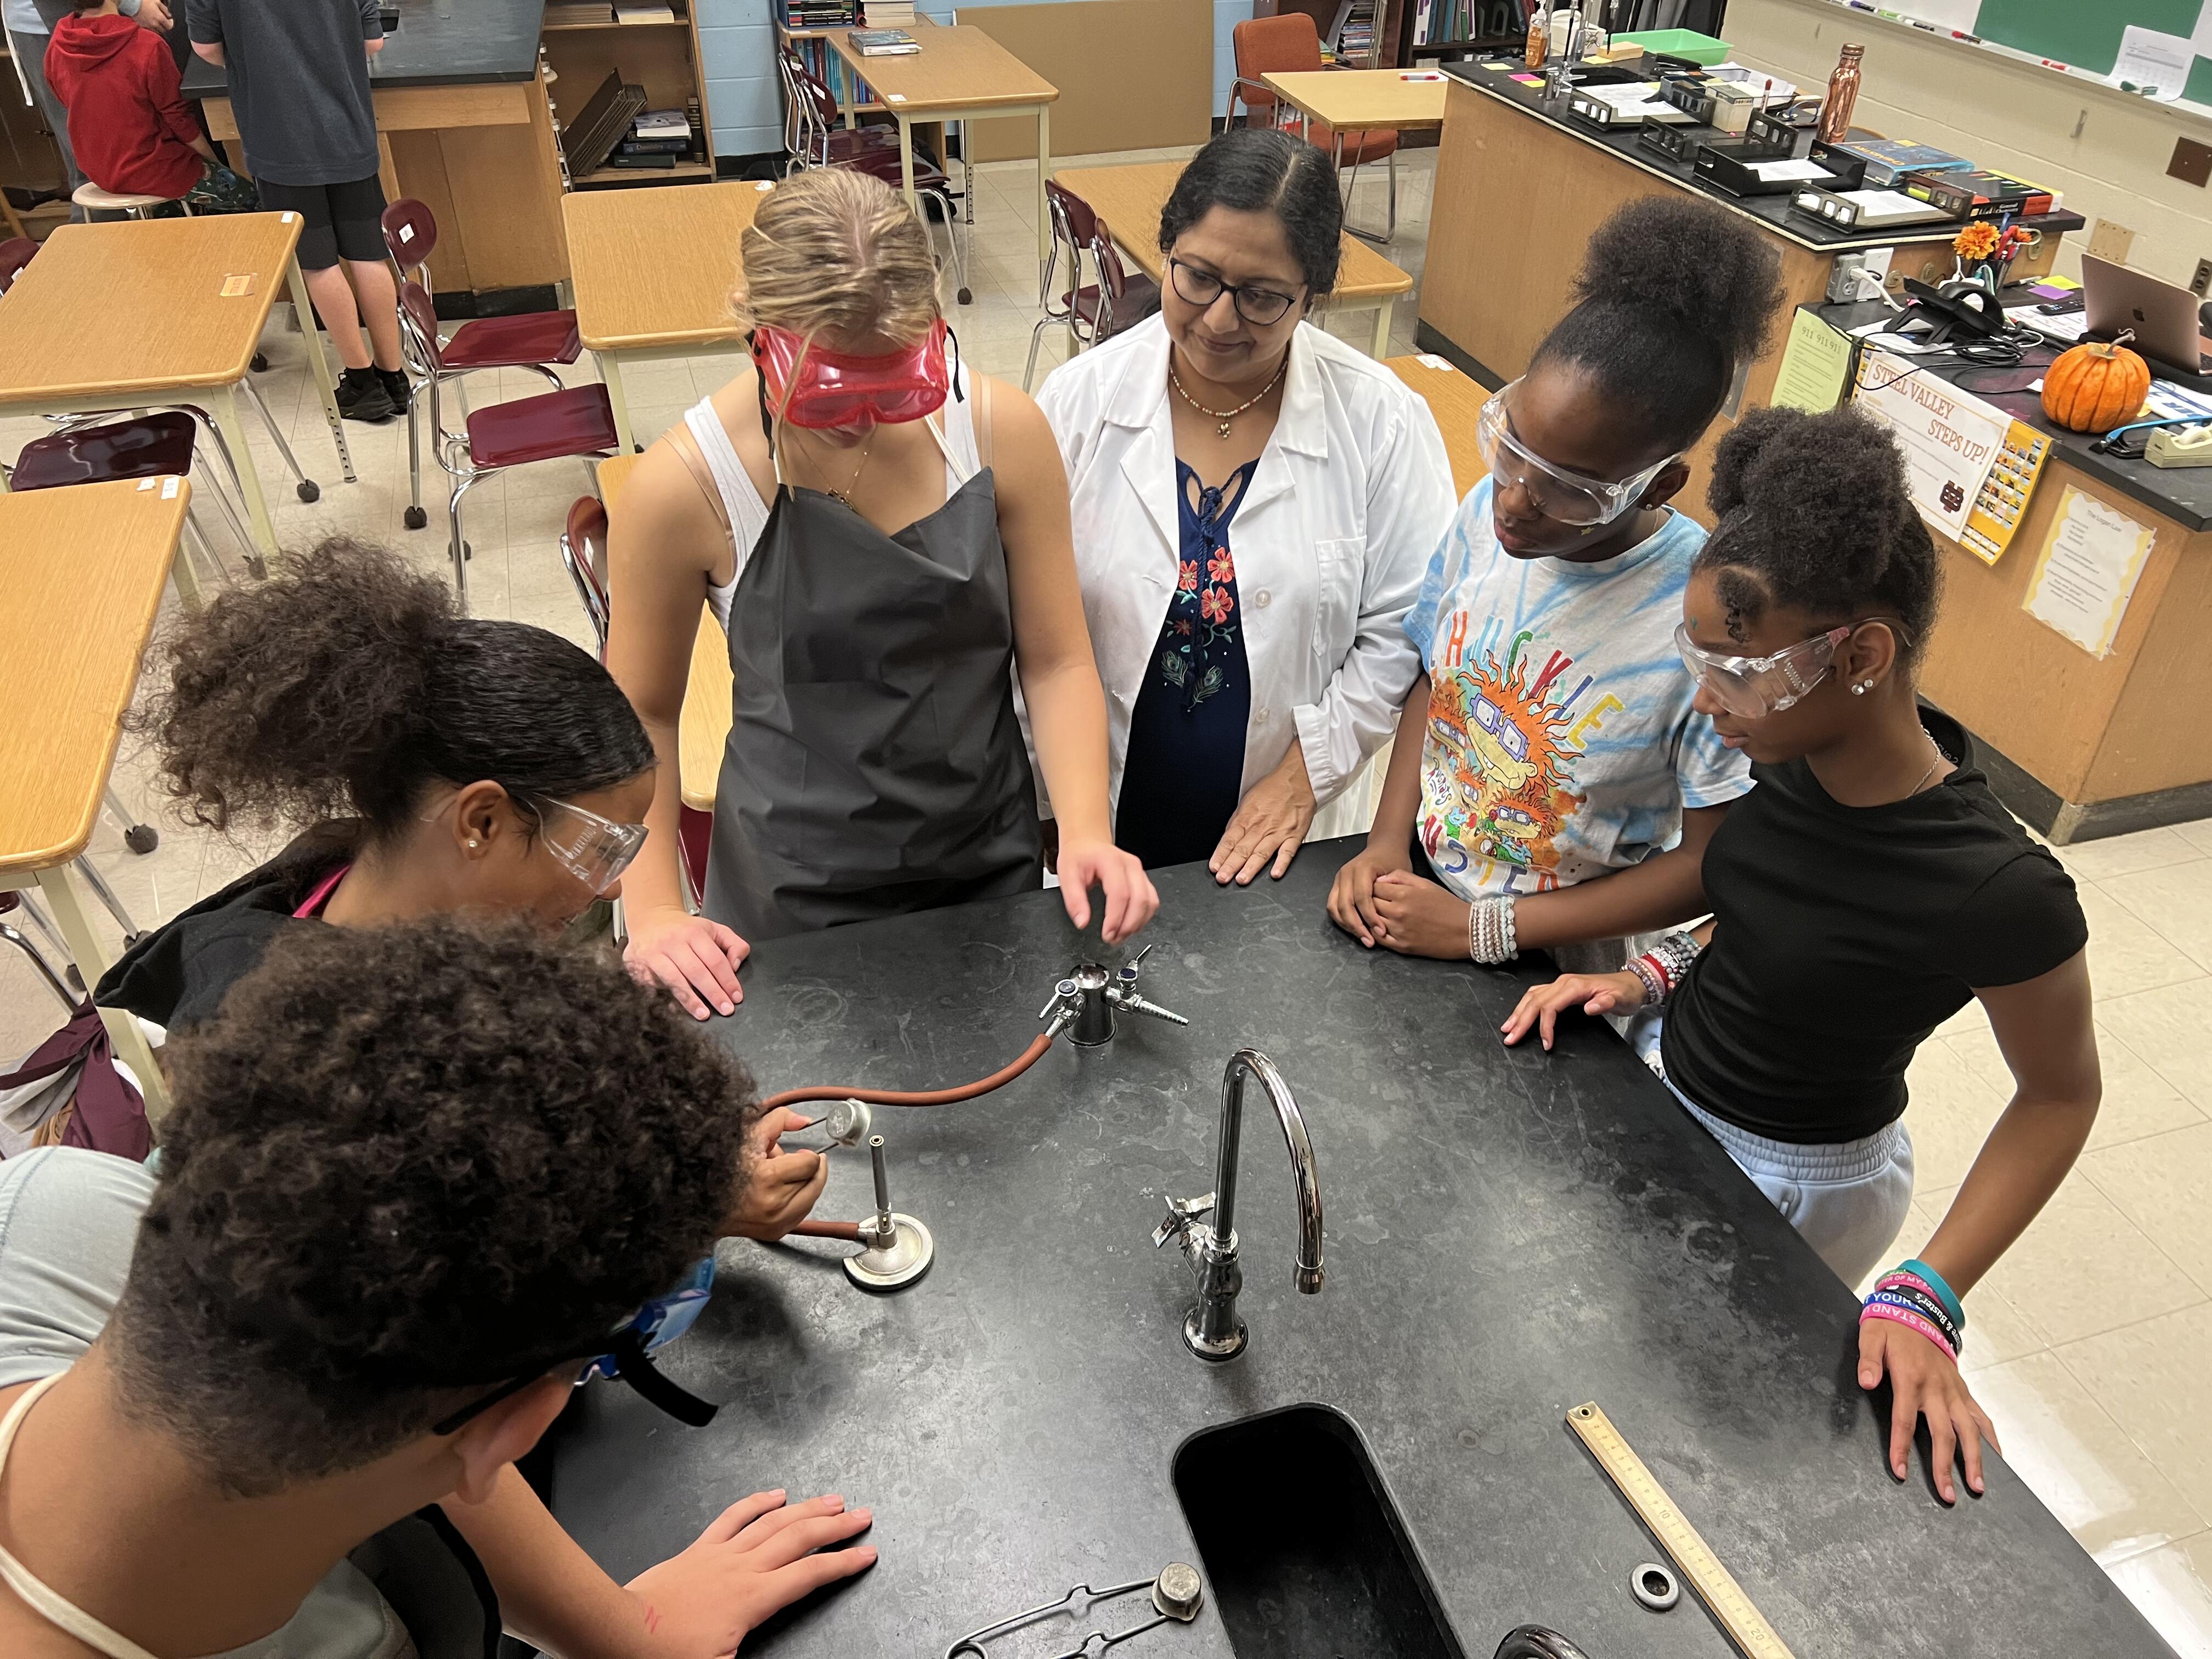 Middle school and high school students collaborate on science experiments in a classroom lab